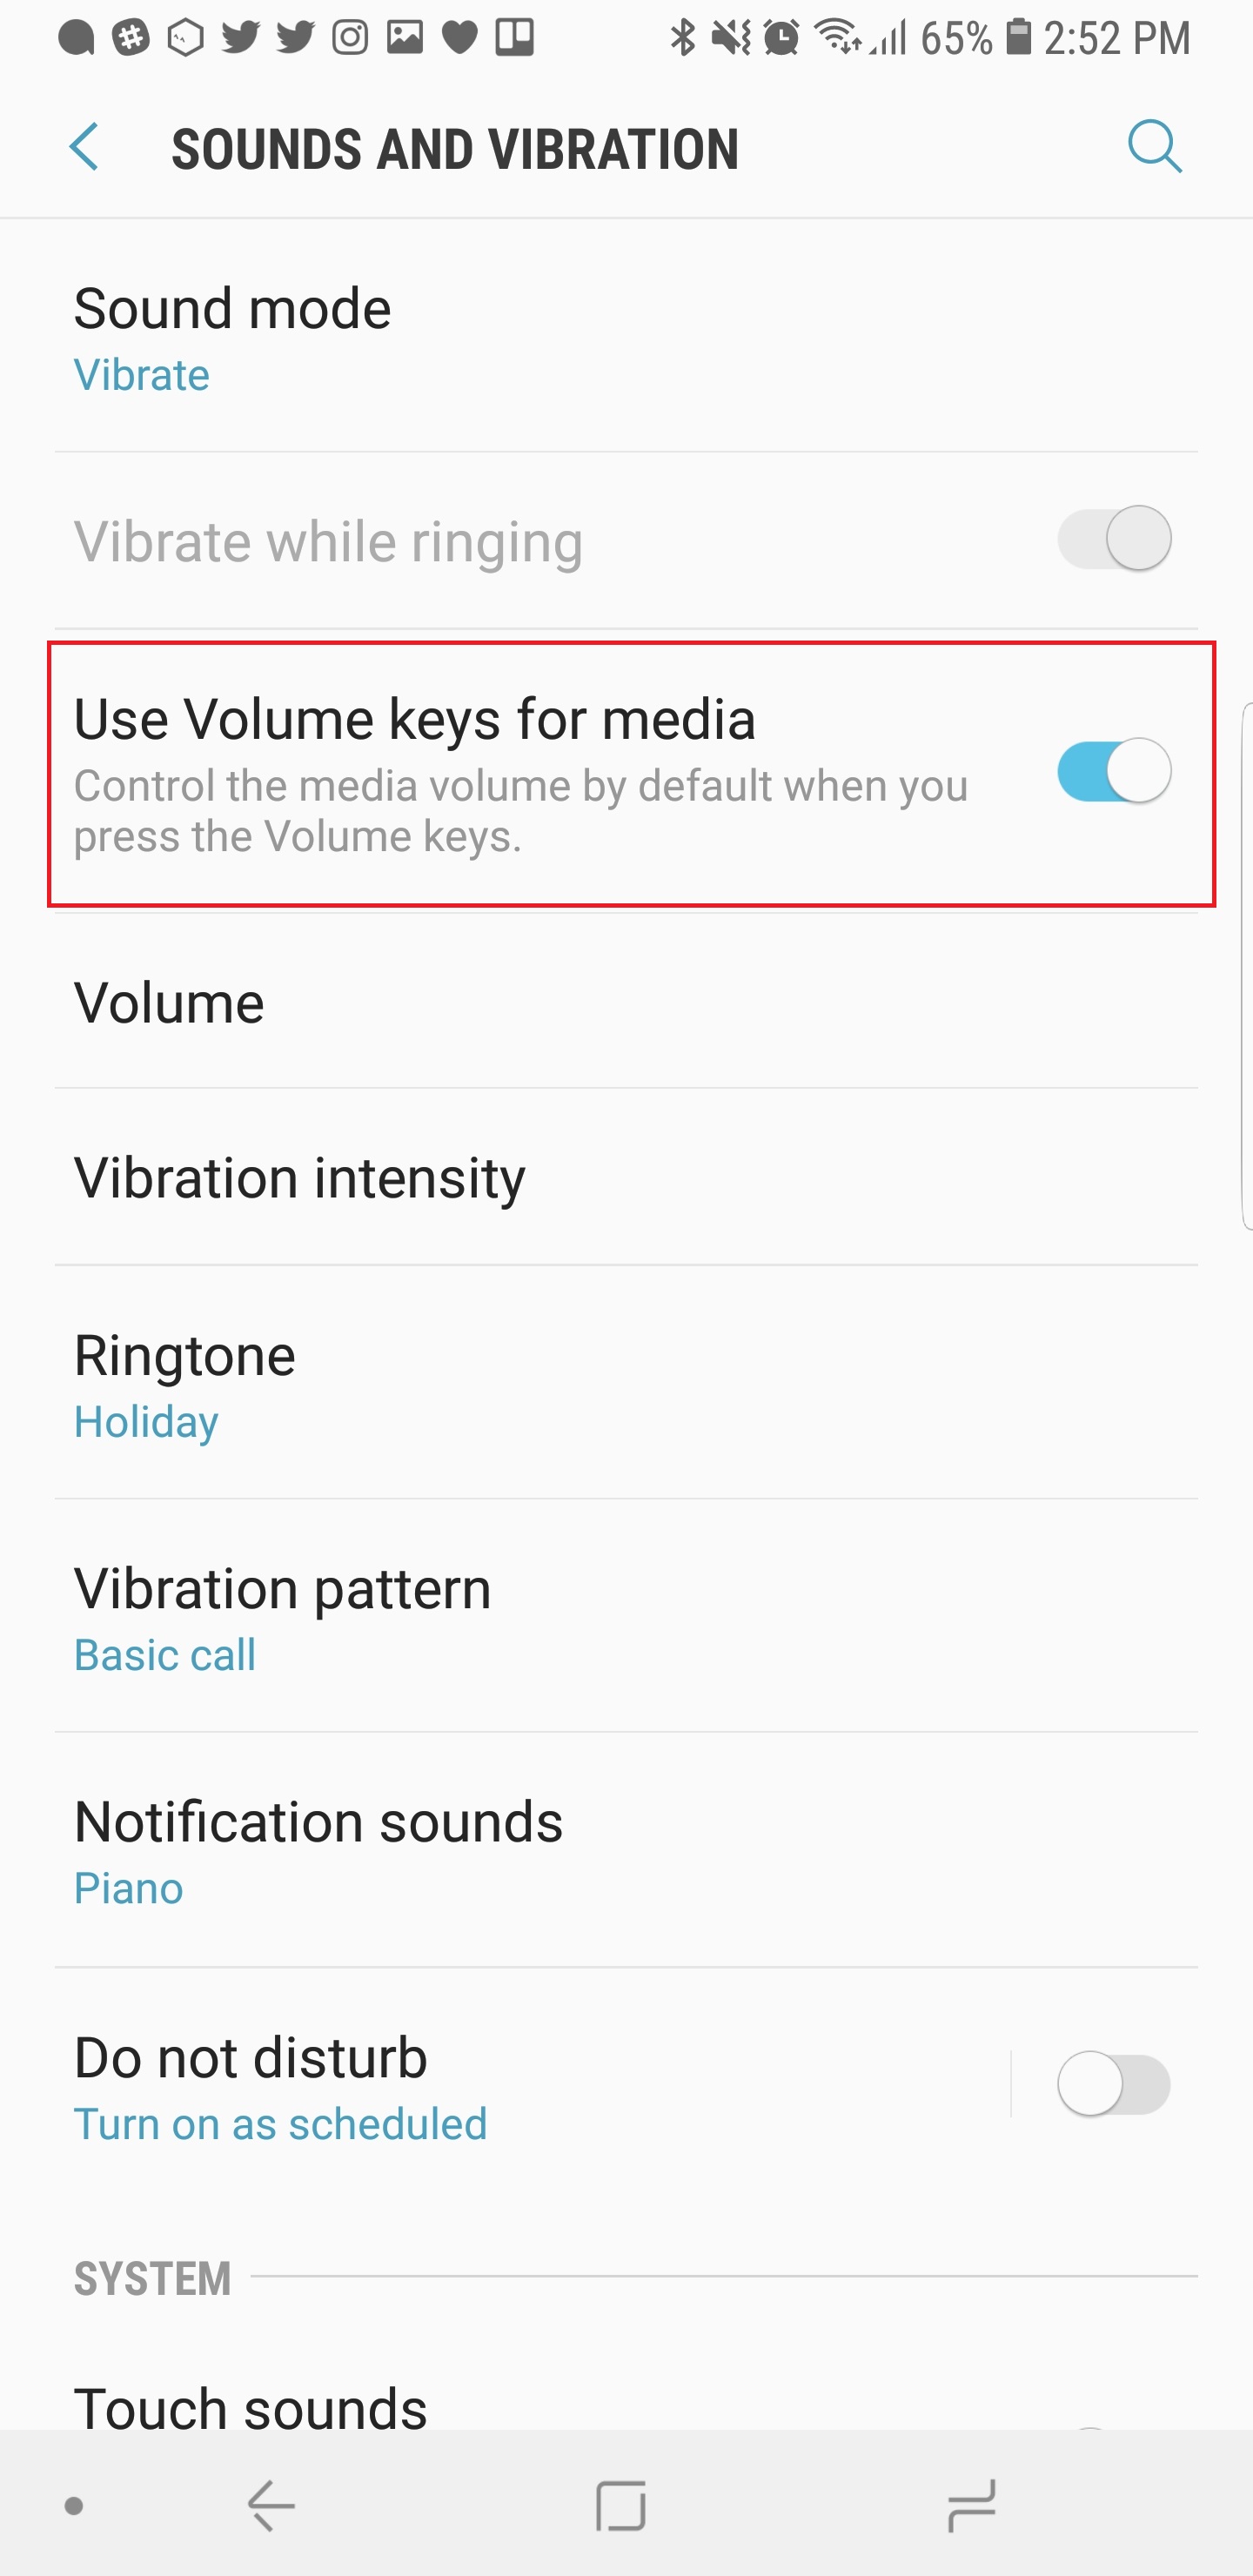 Manage Sounds and Vibration on a Samsung Galaxy S8 - VisiHow